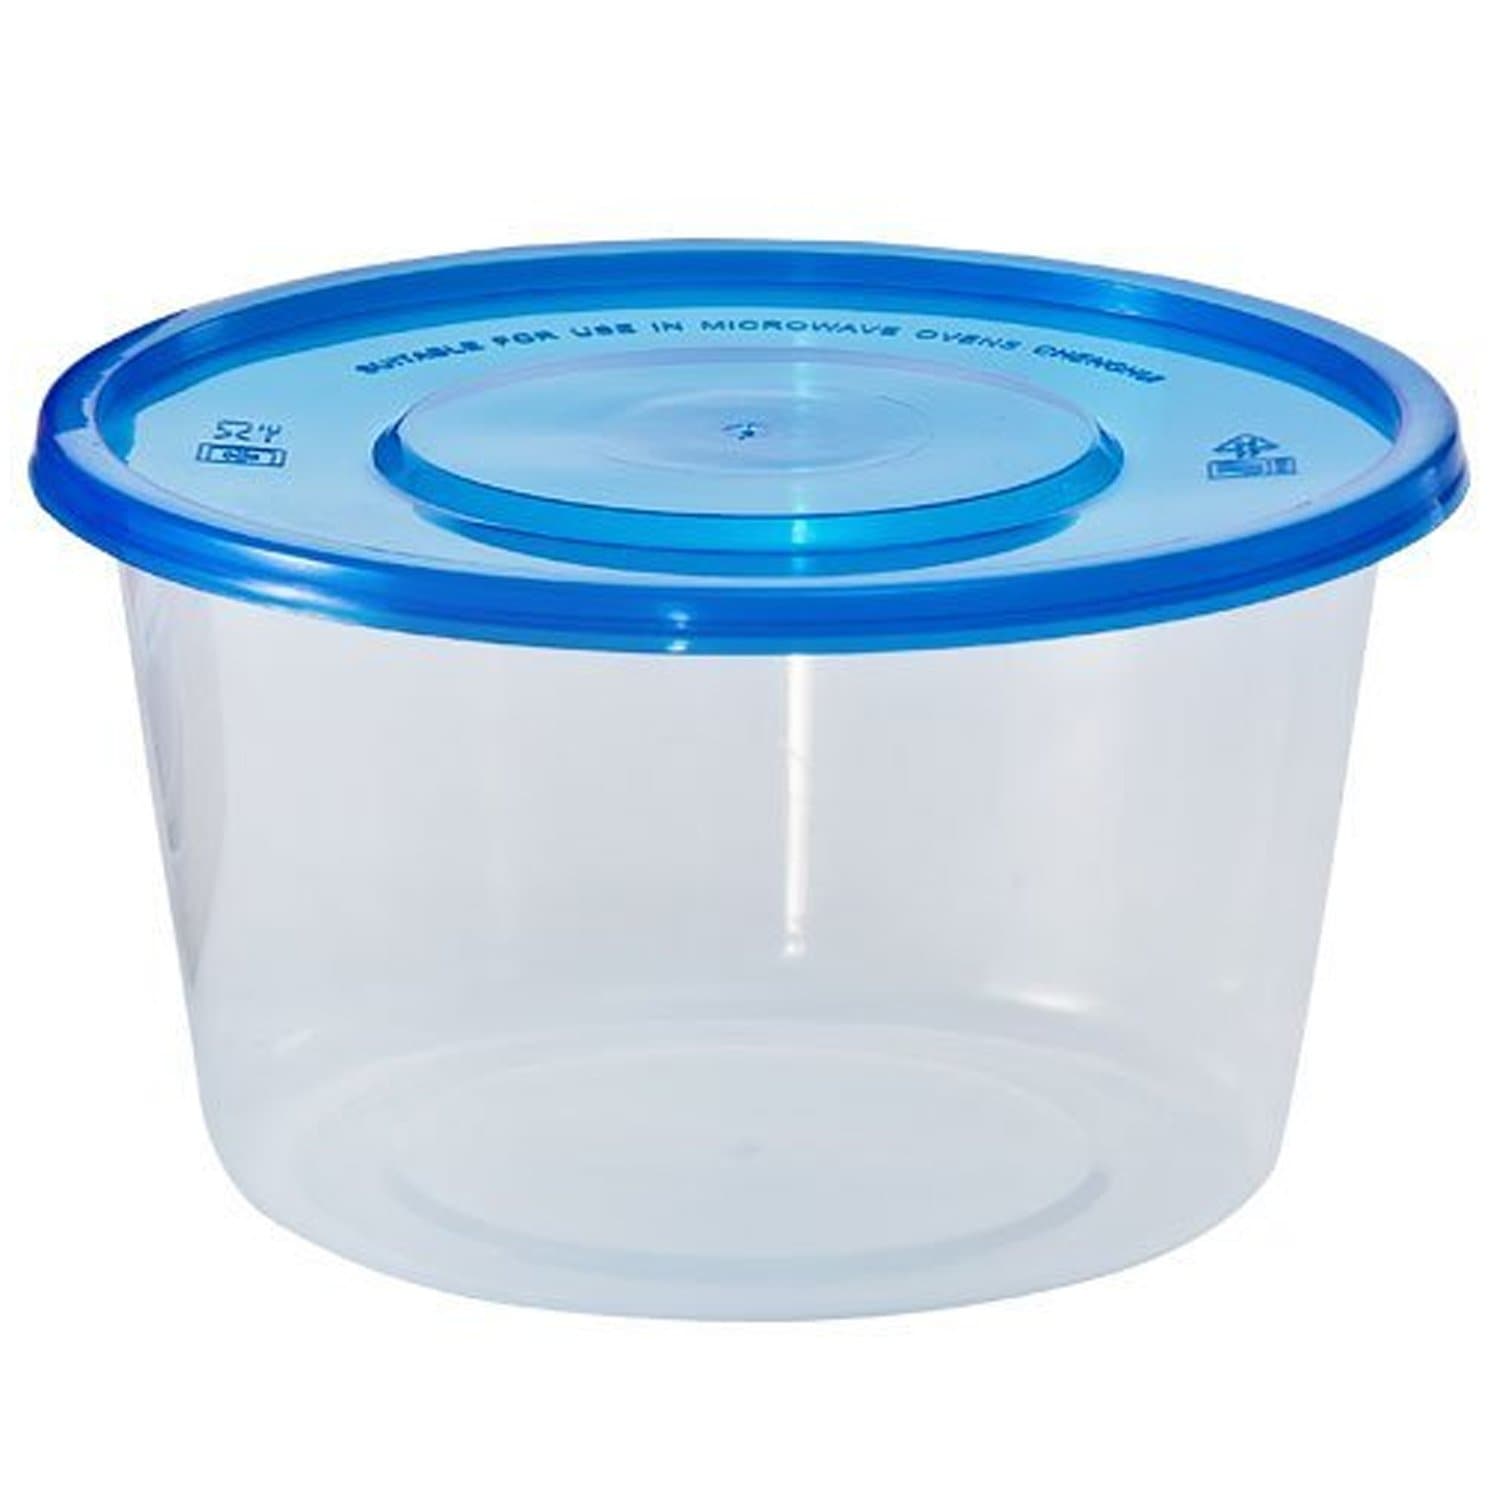 Large 52-oz Lunch Container Tupperware, Salad Bowl with 3